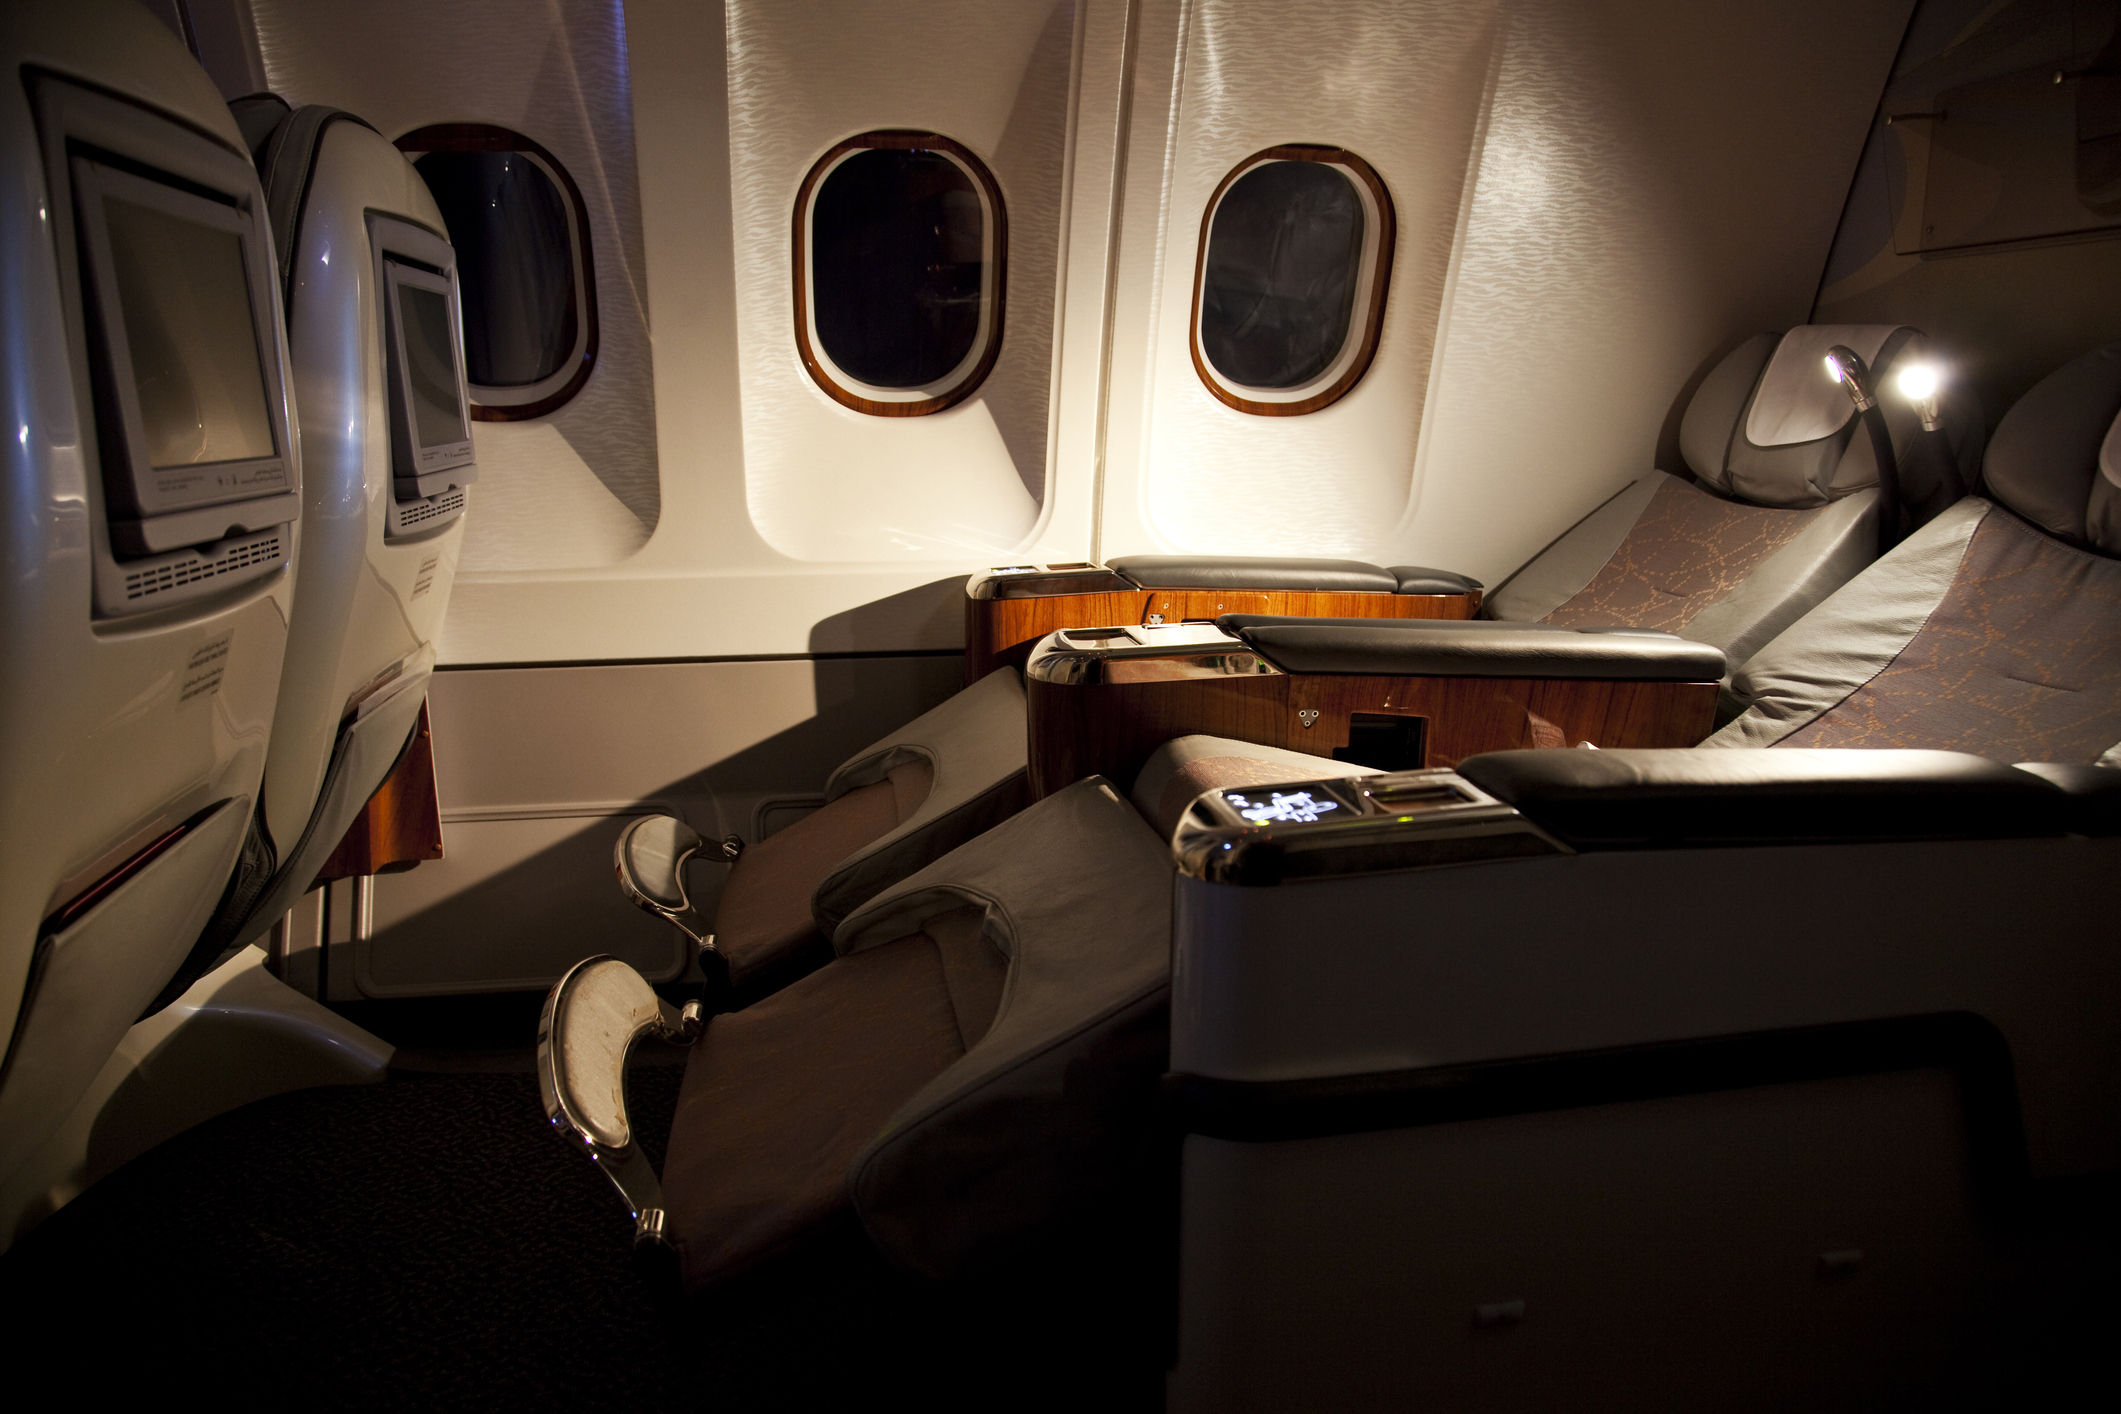 Luxury airplane first-class cabin with reclining seats, entertainment screens, and ambient lighting